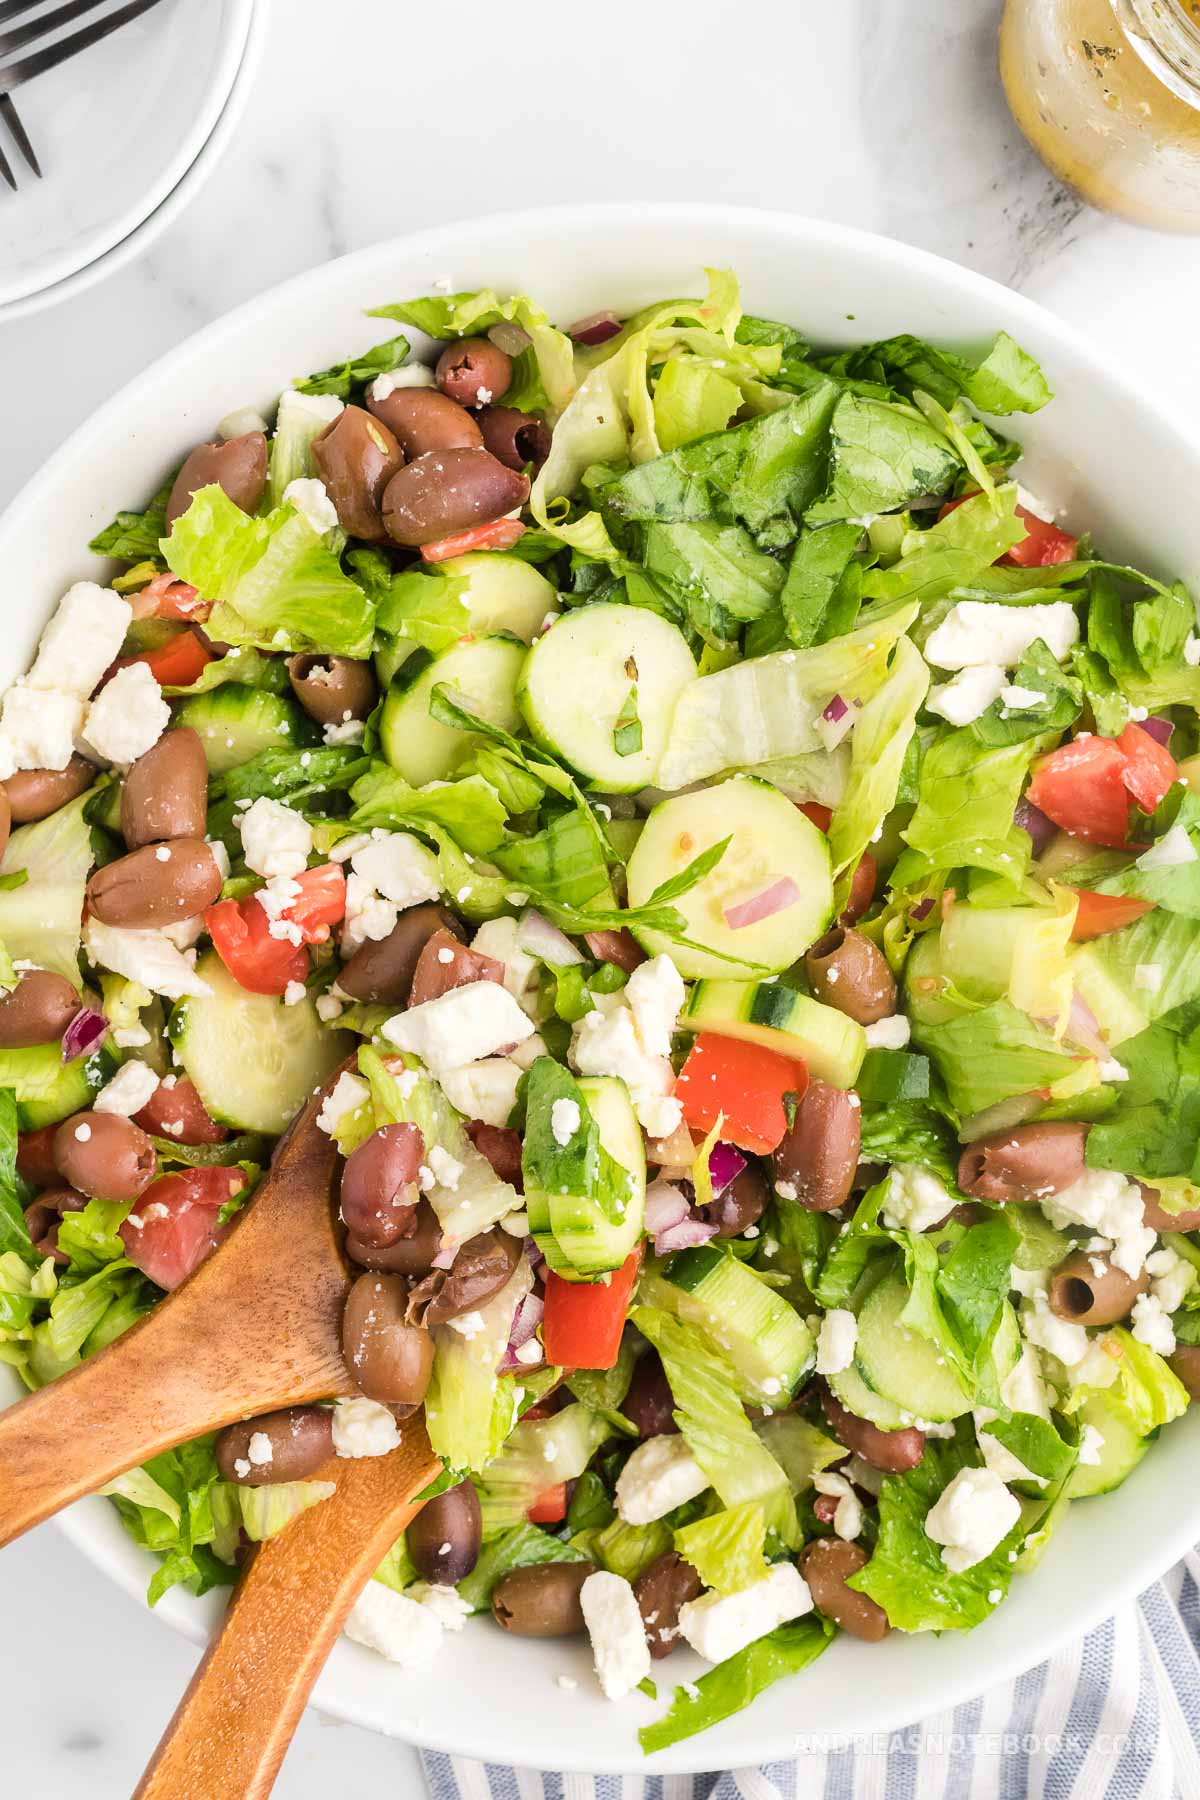 Greek salad with tomatoes, kalamata olives, cucumber, feta cheese and red onions in a large bowl.